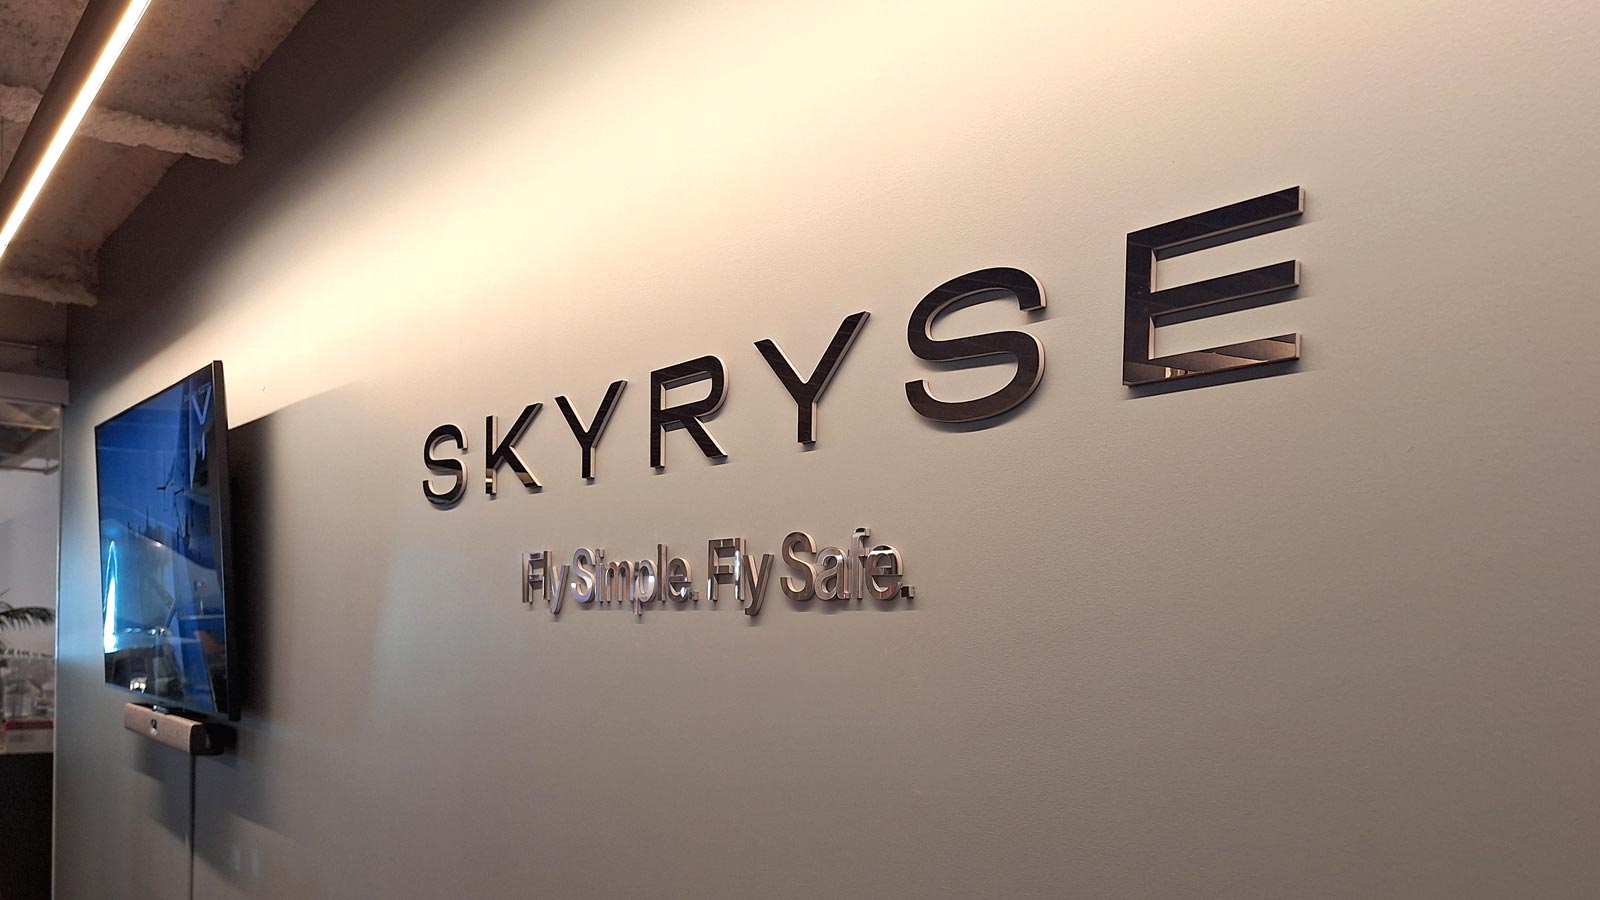 skyryse interior sign attached to the wall